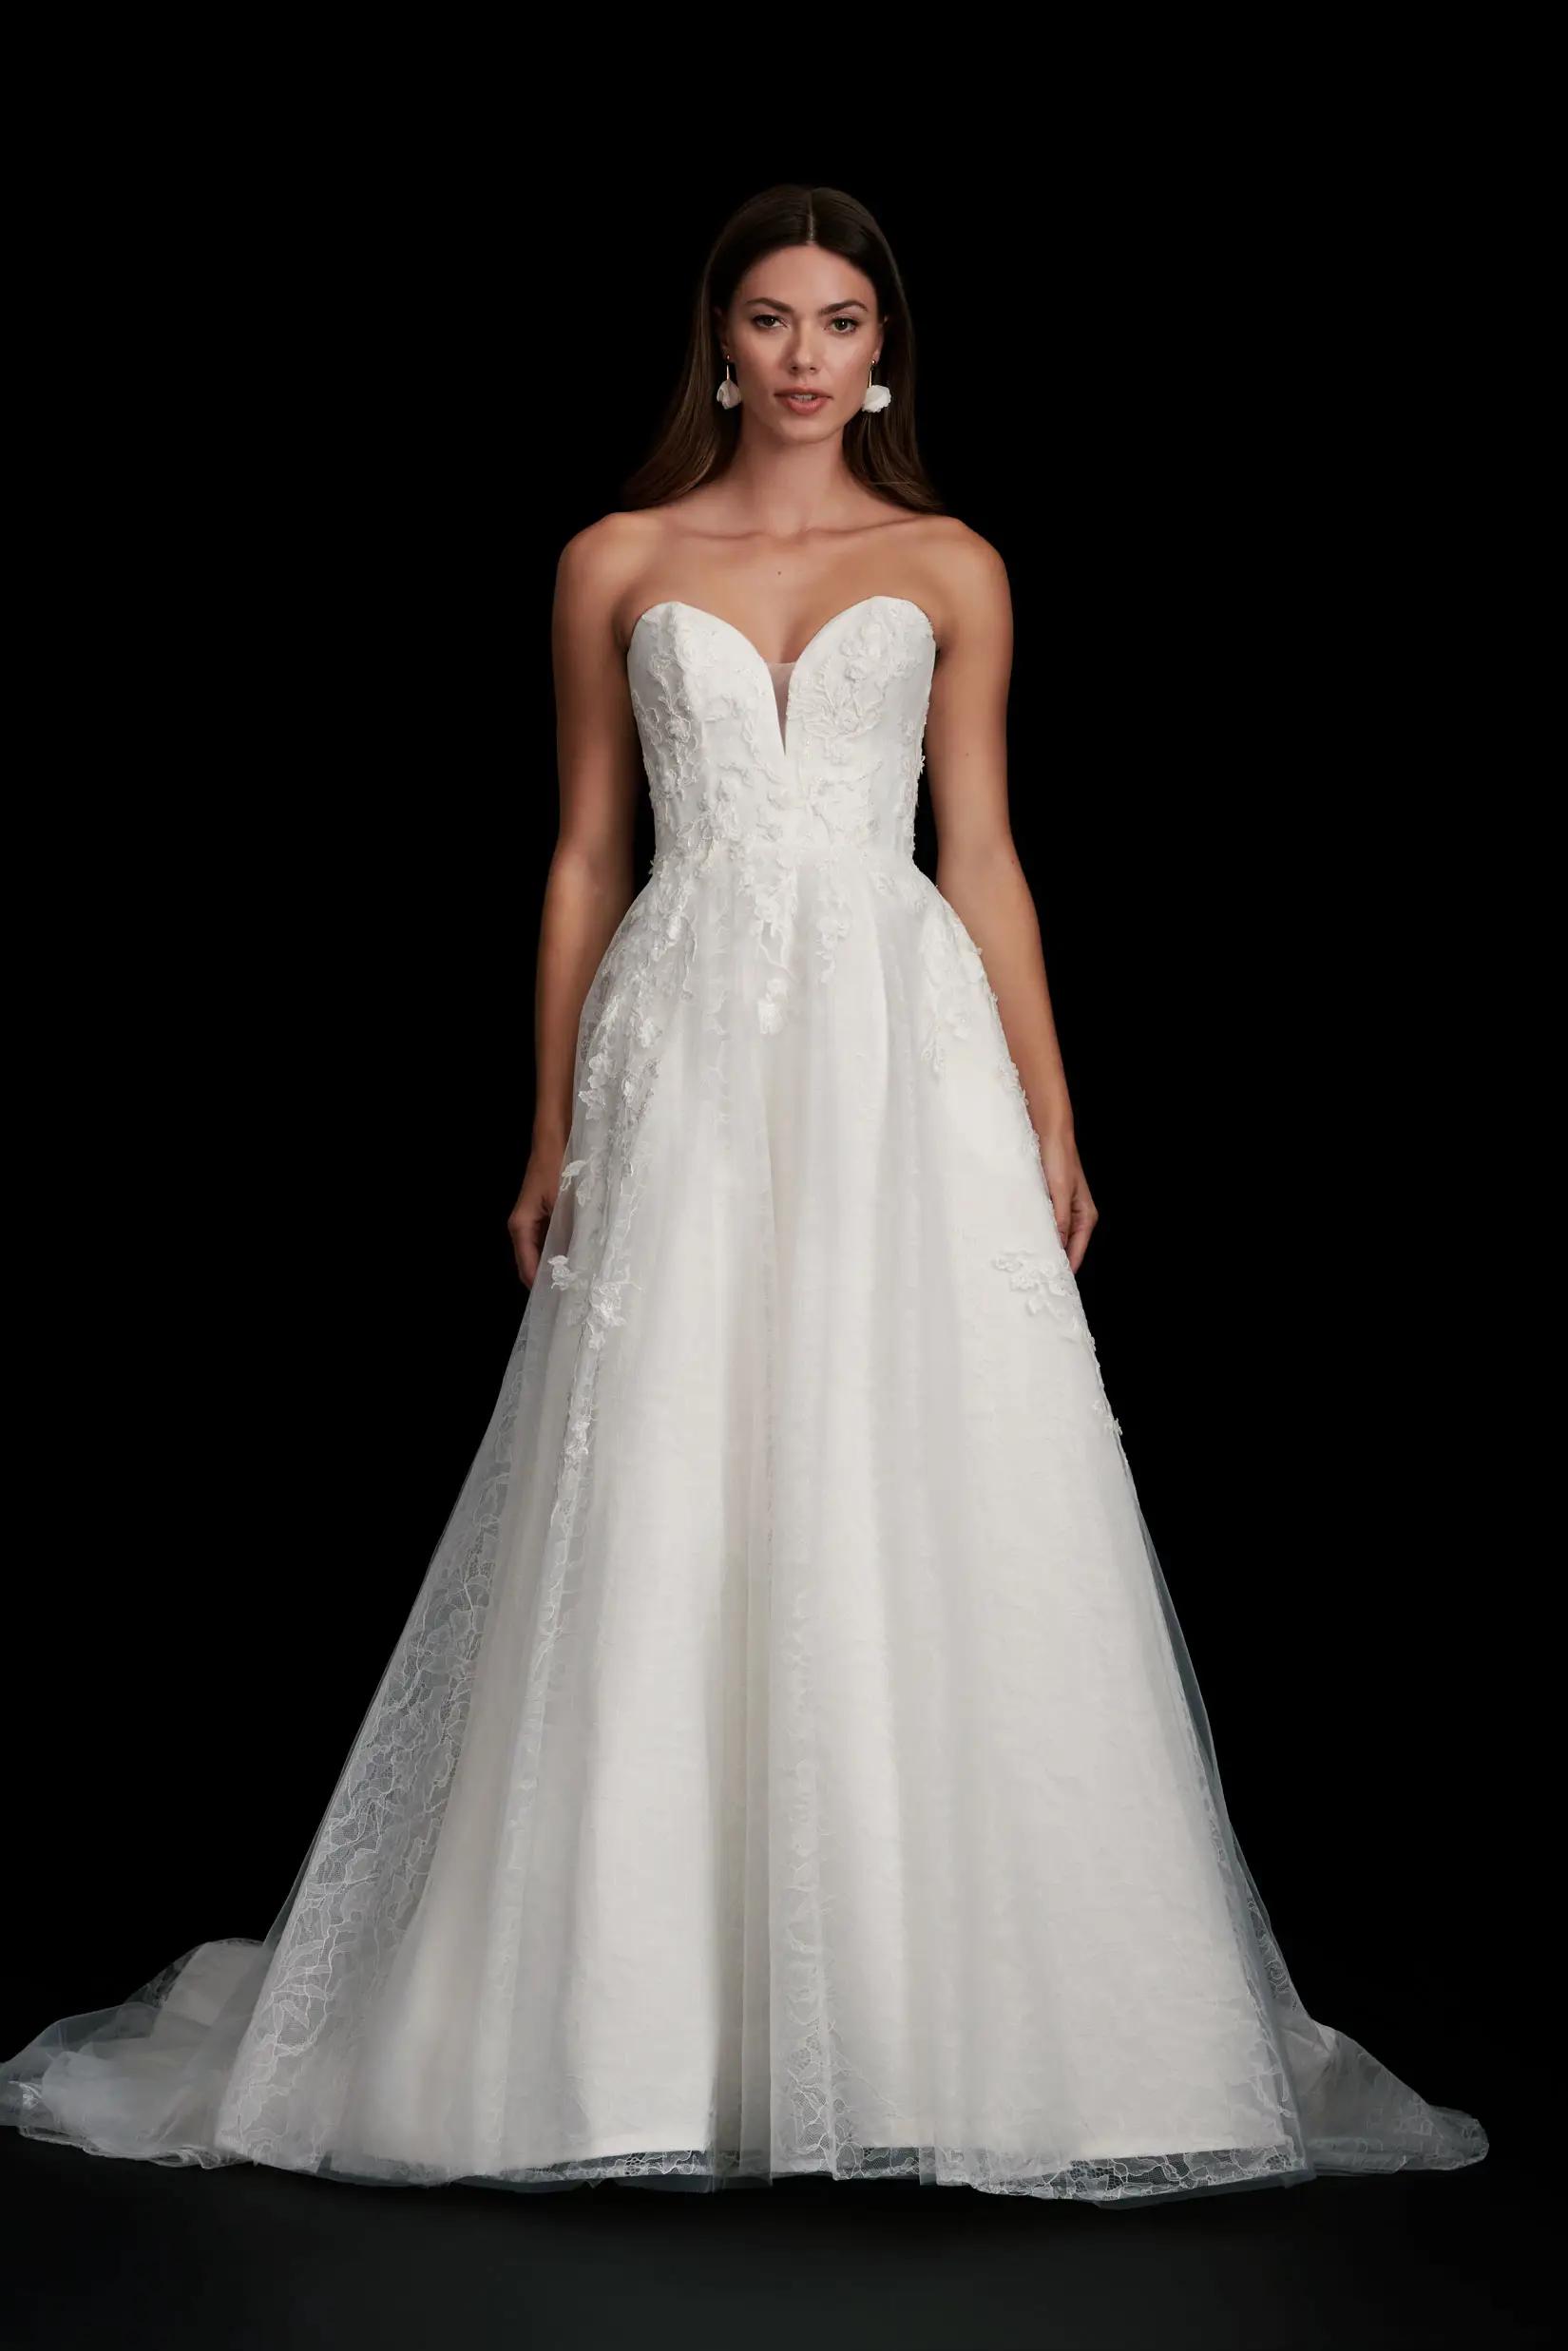 Adela lace sweetheart ballgown wedding dress in tulle by Kelly Faetanini in Columbus, Ohio